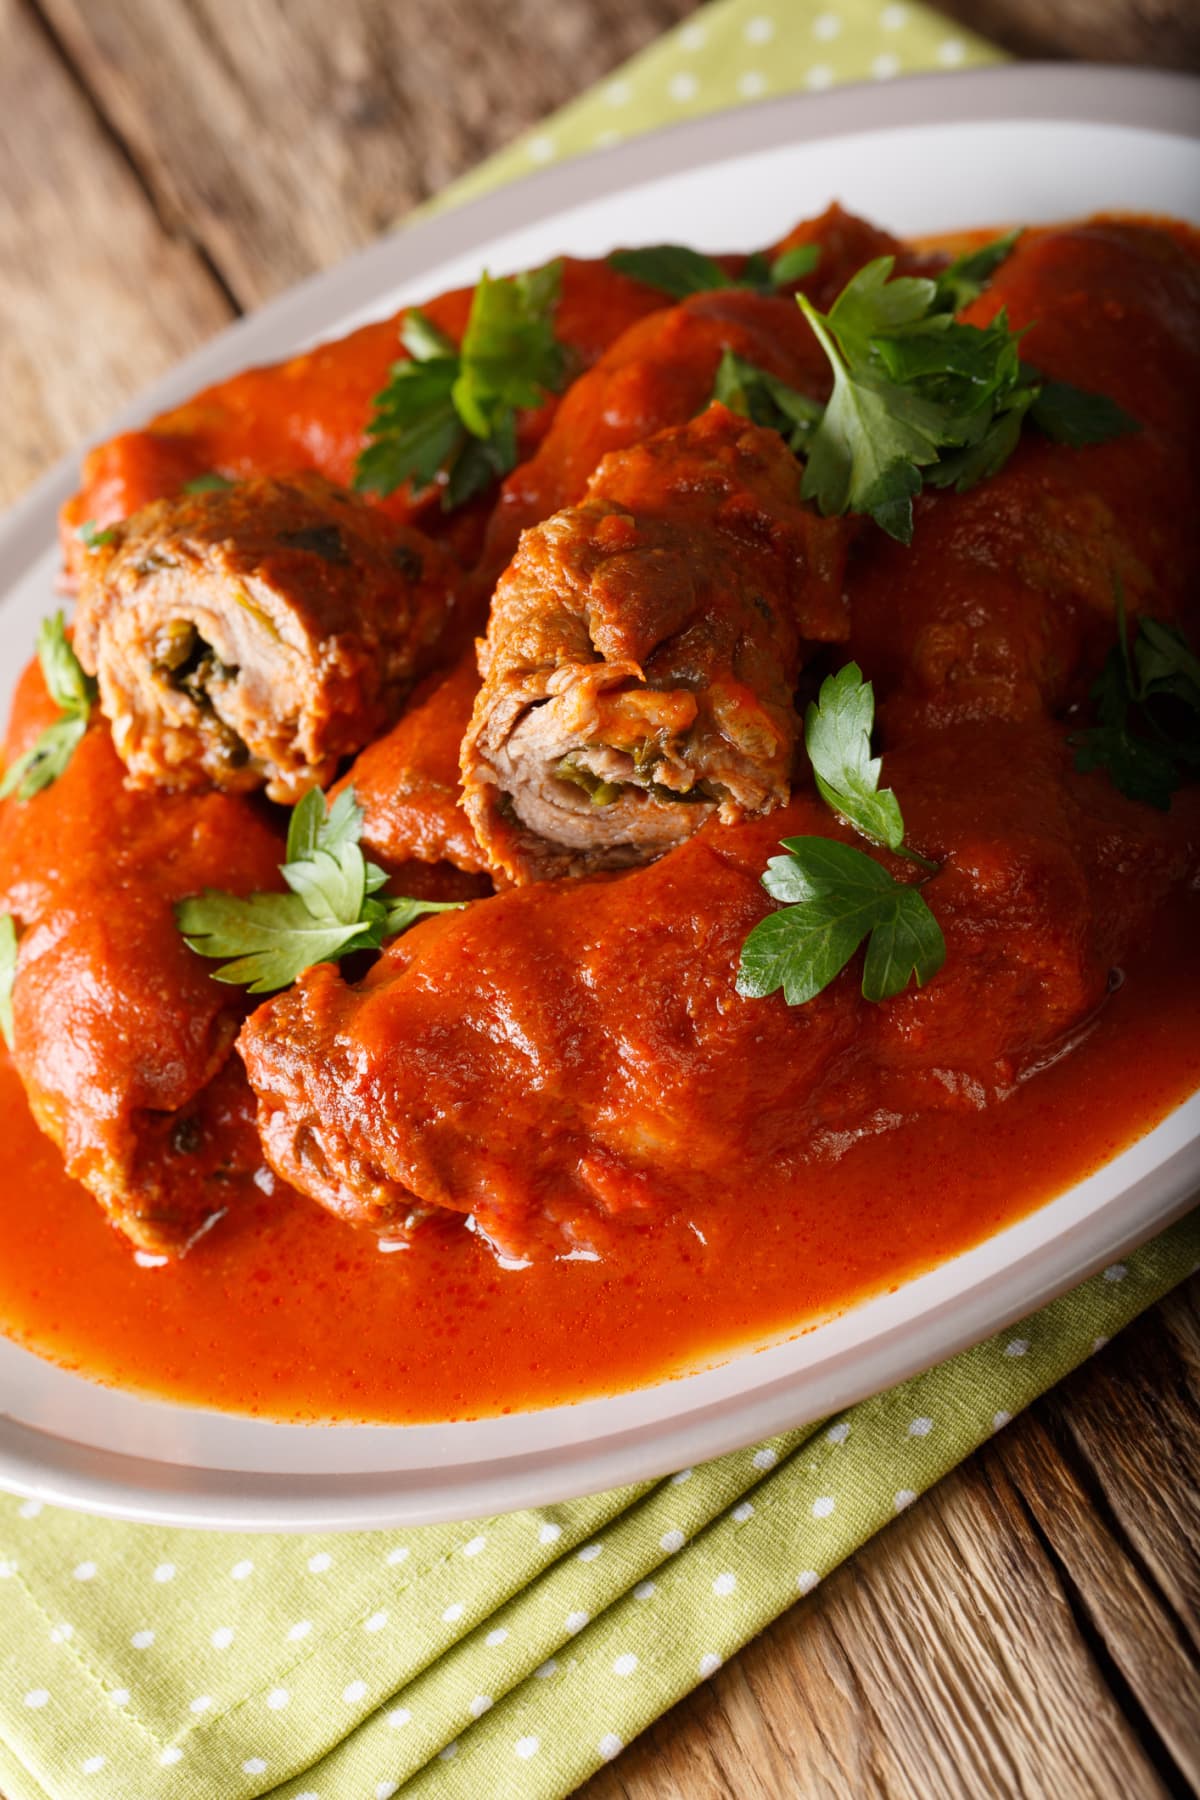 close-up of italian Braciole - beef steak rolls filled with sliced prosciutto, grated parmesan cheese and parsley, cooked with marinara sauce in a skillet, view from above